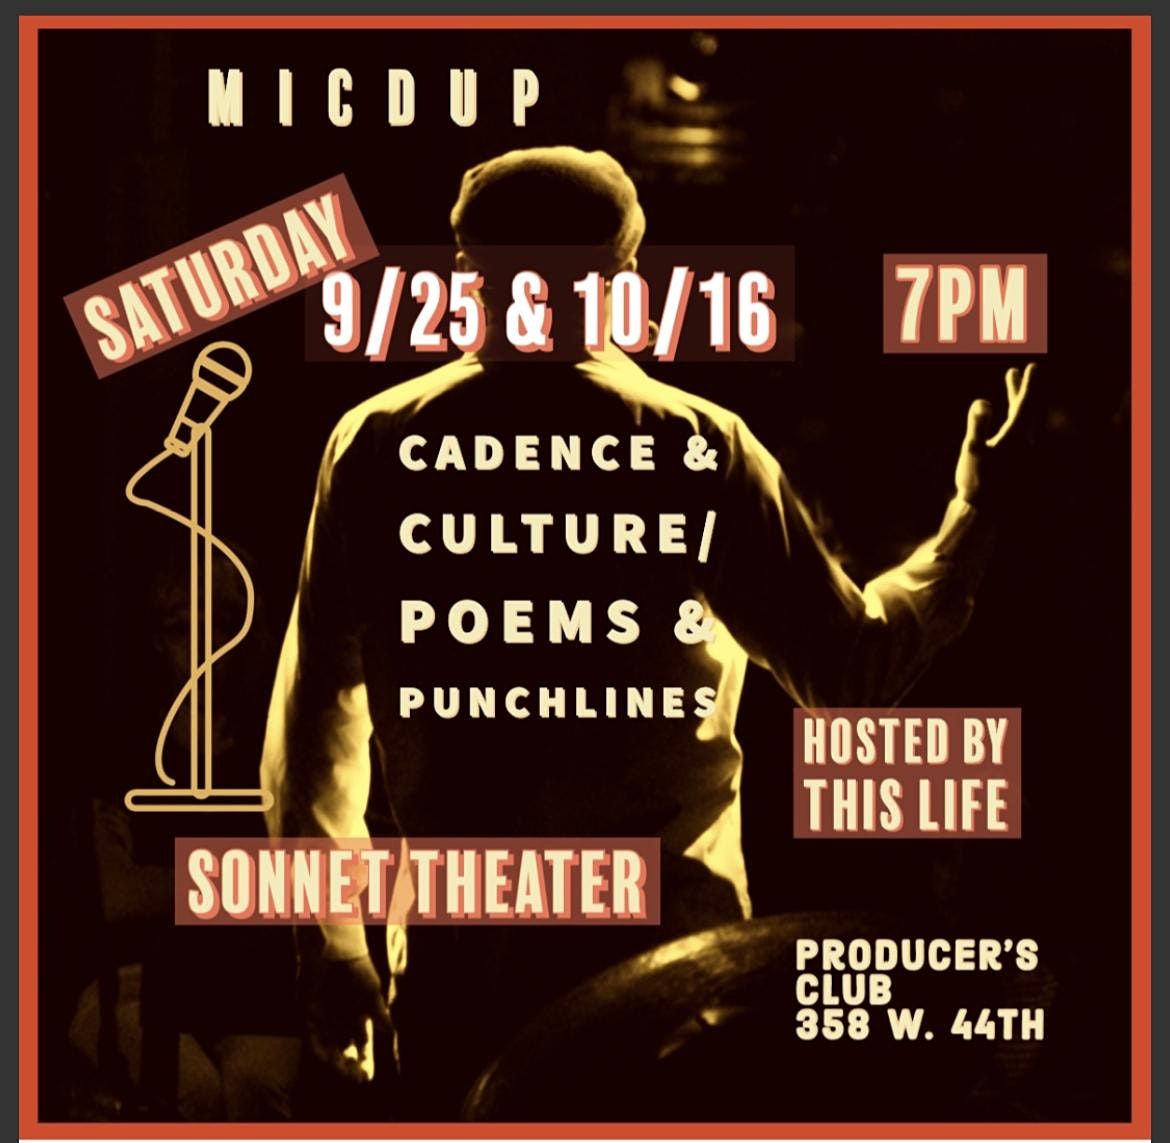 Micdup Cadence & Culture\/Poems & Punchlines